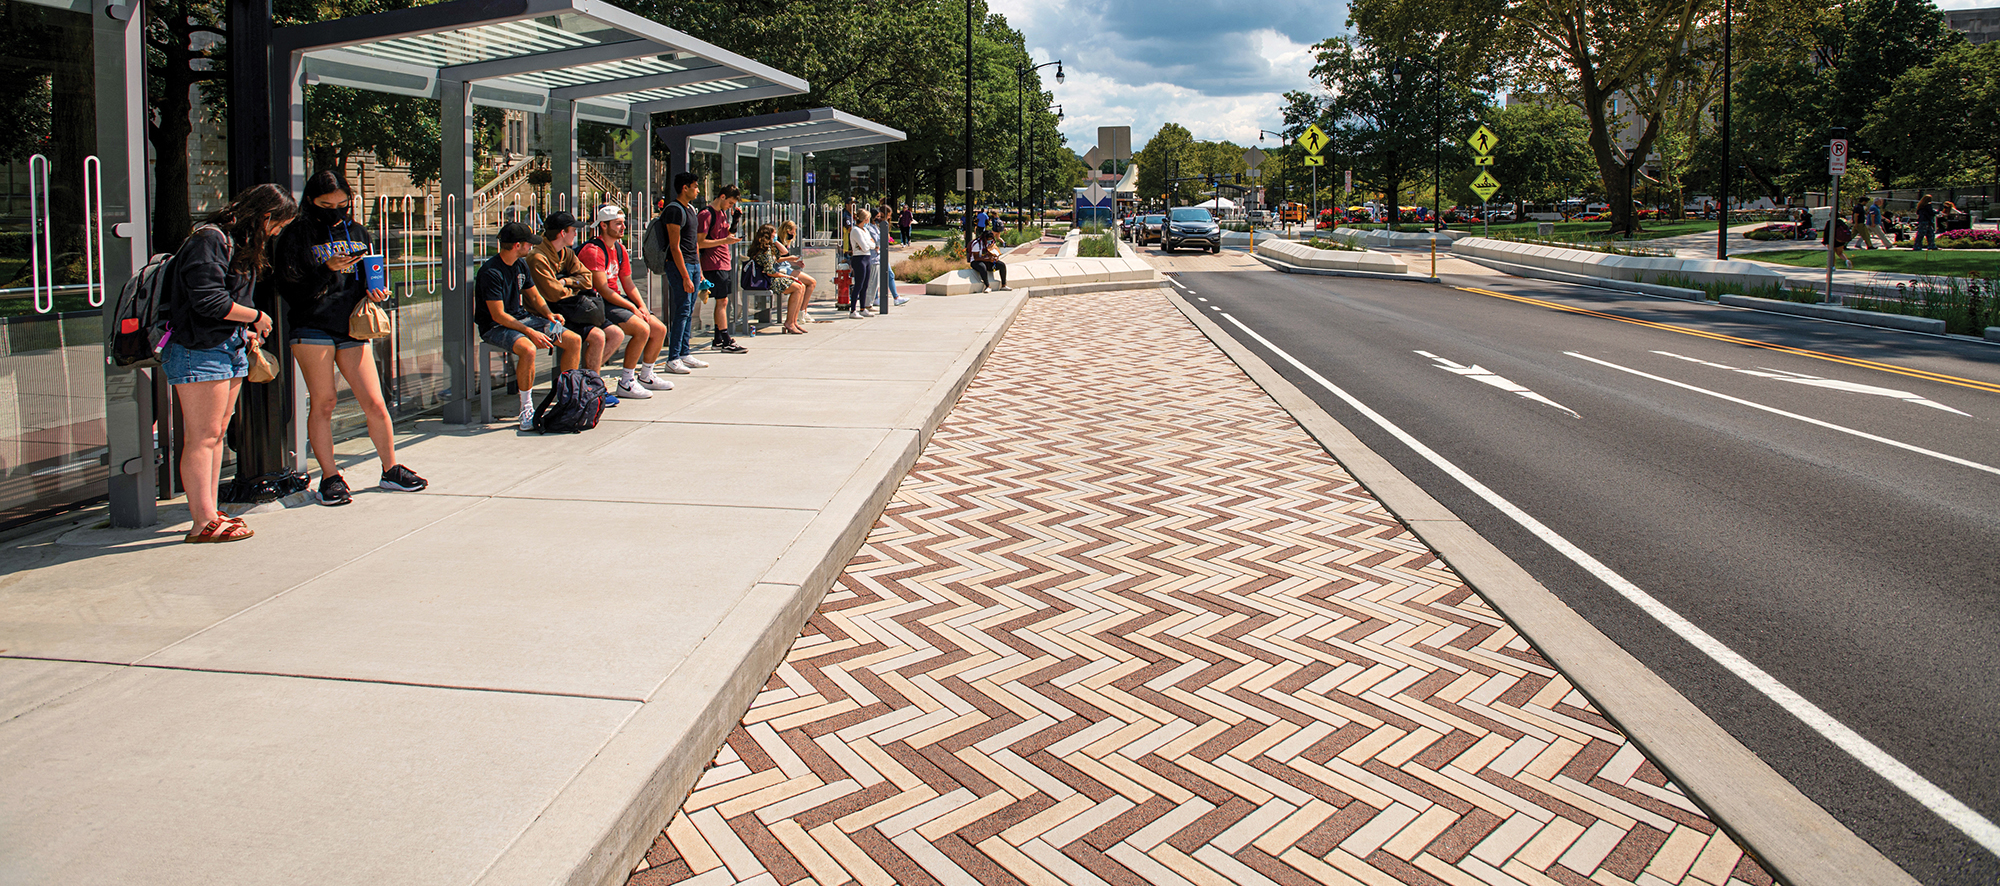 Students in summer clothing wait under bus shelters on a tree-lined road partially paved in Eco-Promenade in a colorful herringbone pattern.